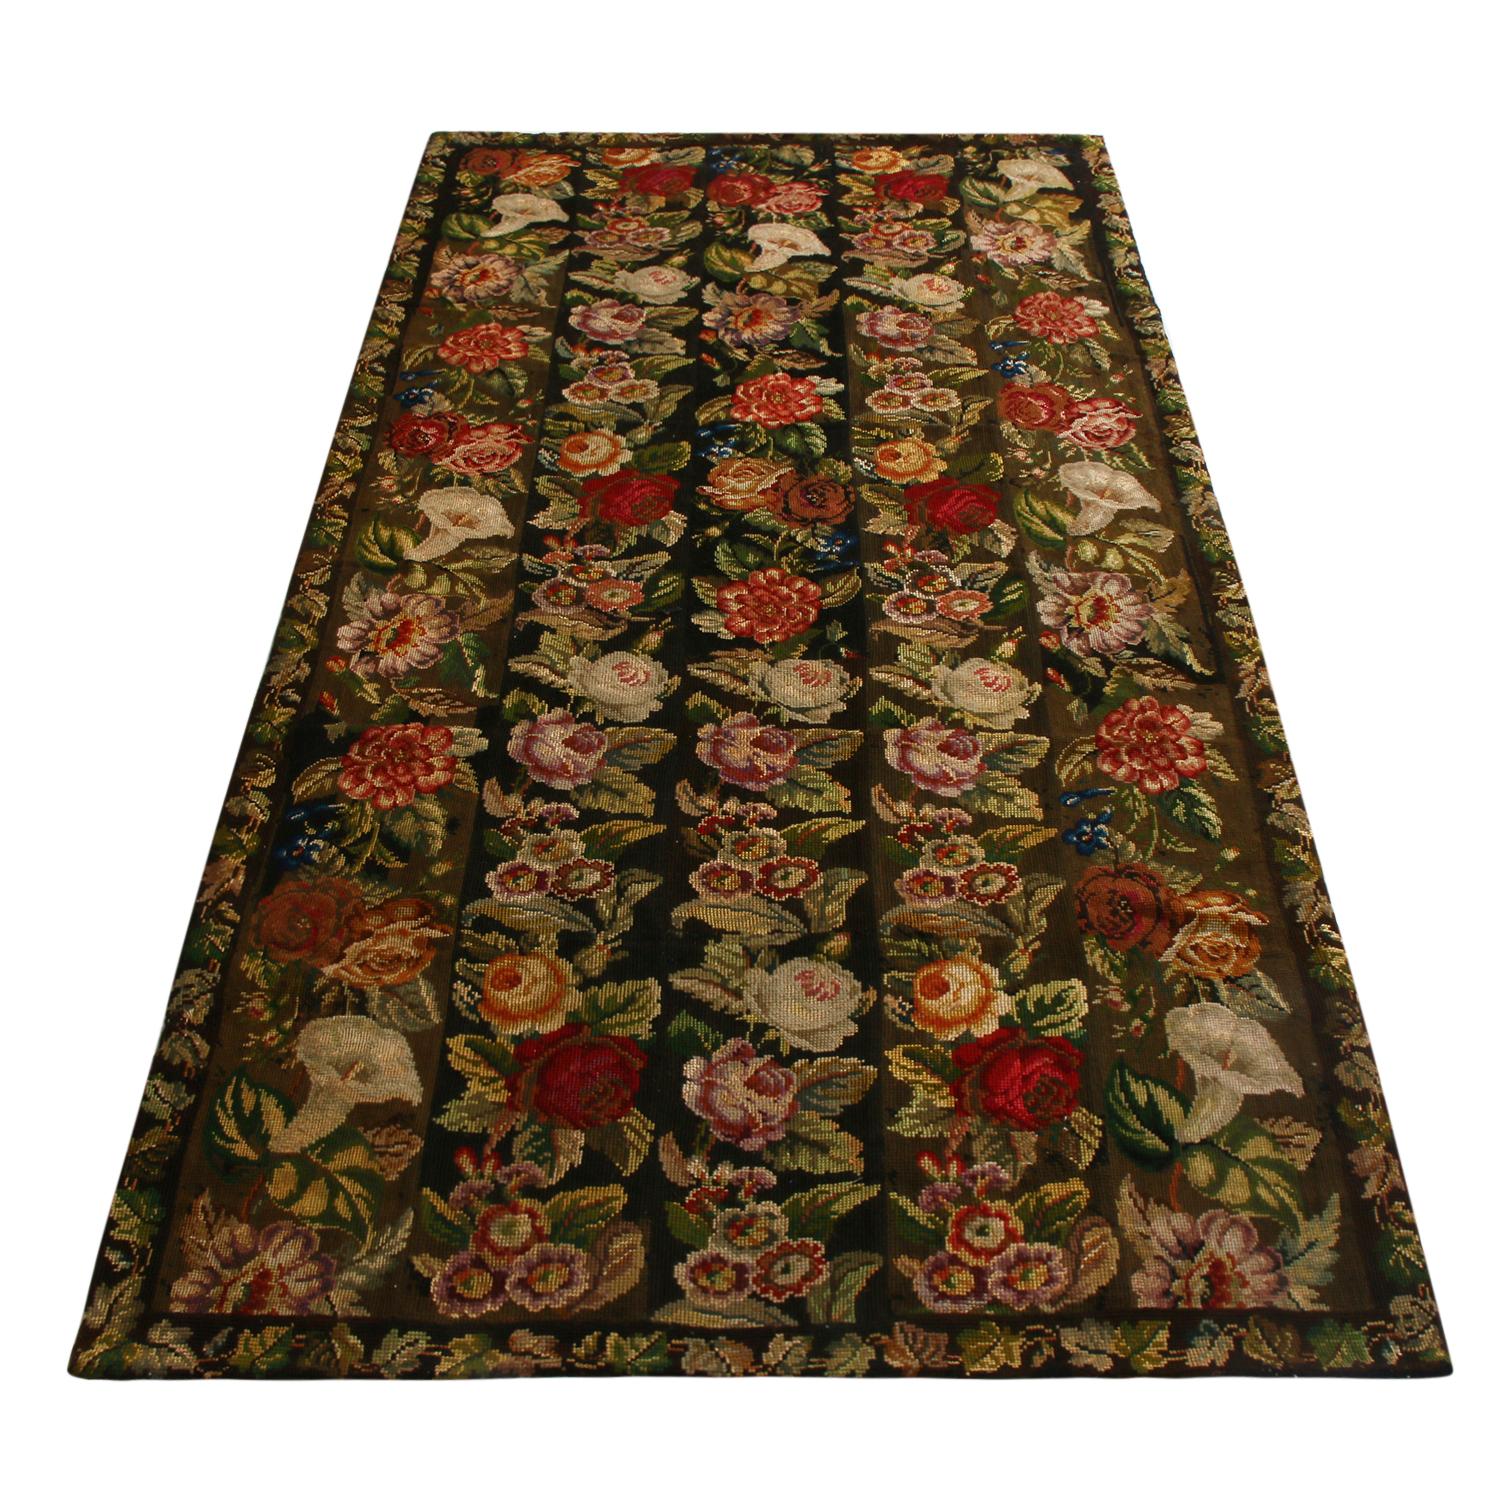 Hand stitched in high-quality wool originating from England in 1910, this antique needlepoint floral rug enjoys exceptionally fine detail and a complementary array of crimson red, cream white, lavender and vibrant orange colorways against the column